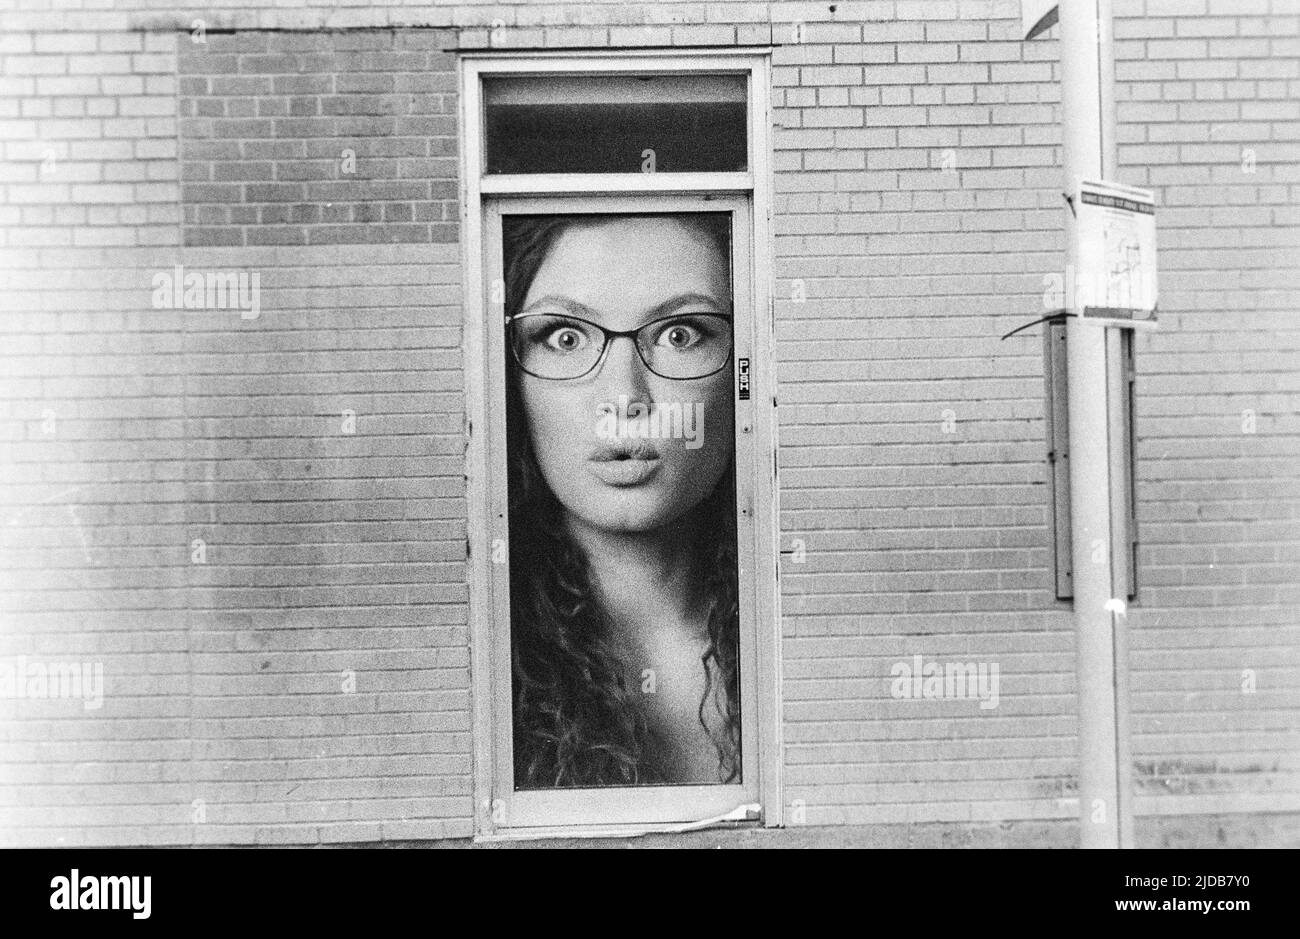 Woman's face visible peering out of a small window of a brick building; Winnipeg, Manitoba, Canada Stock Photo